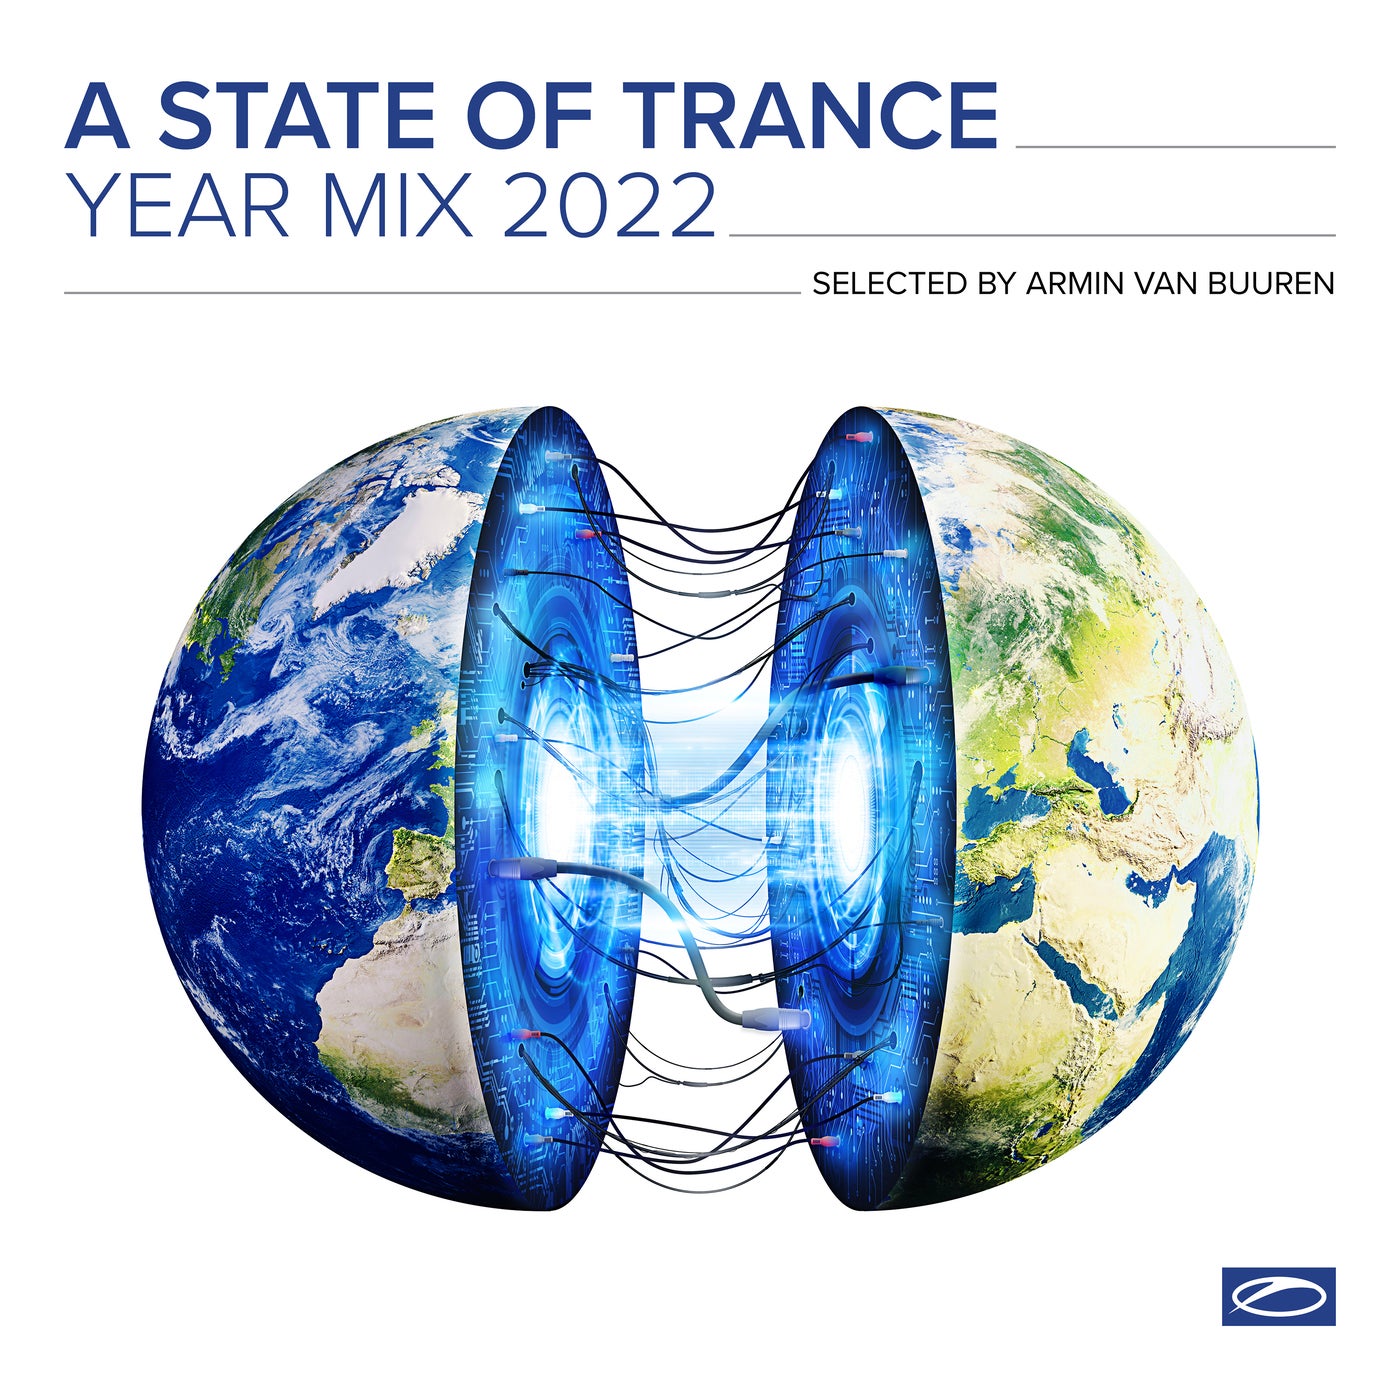 A State Of Trance Year Mix 2022 - Selected by Armin van Buuren